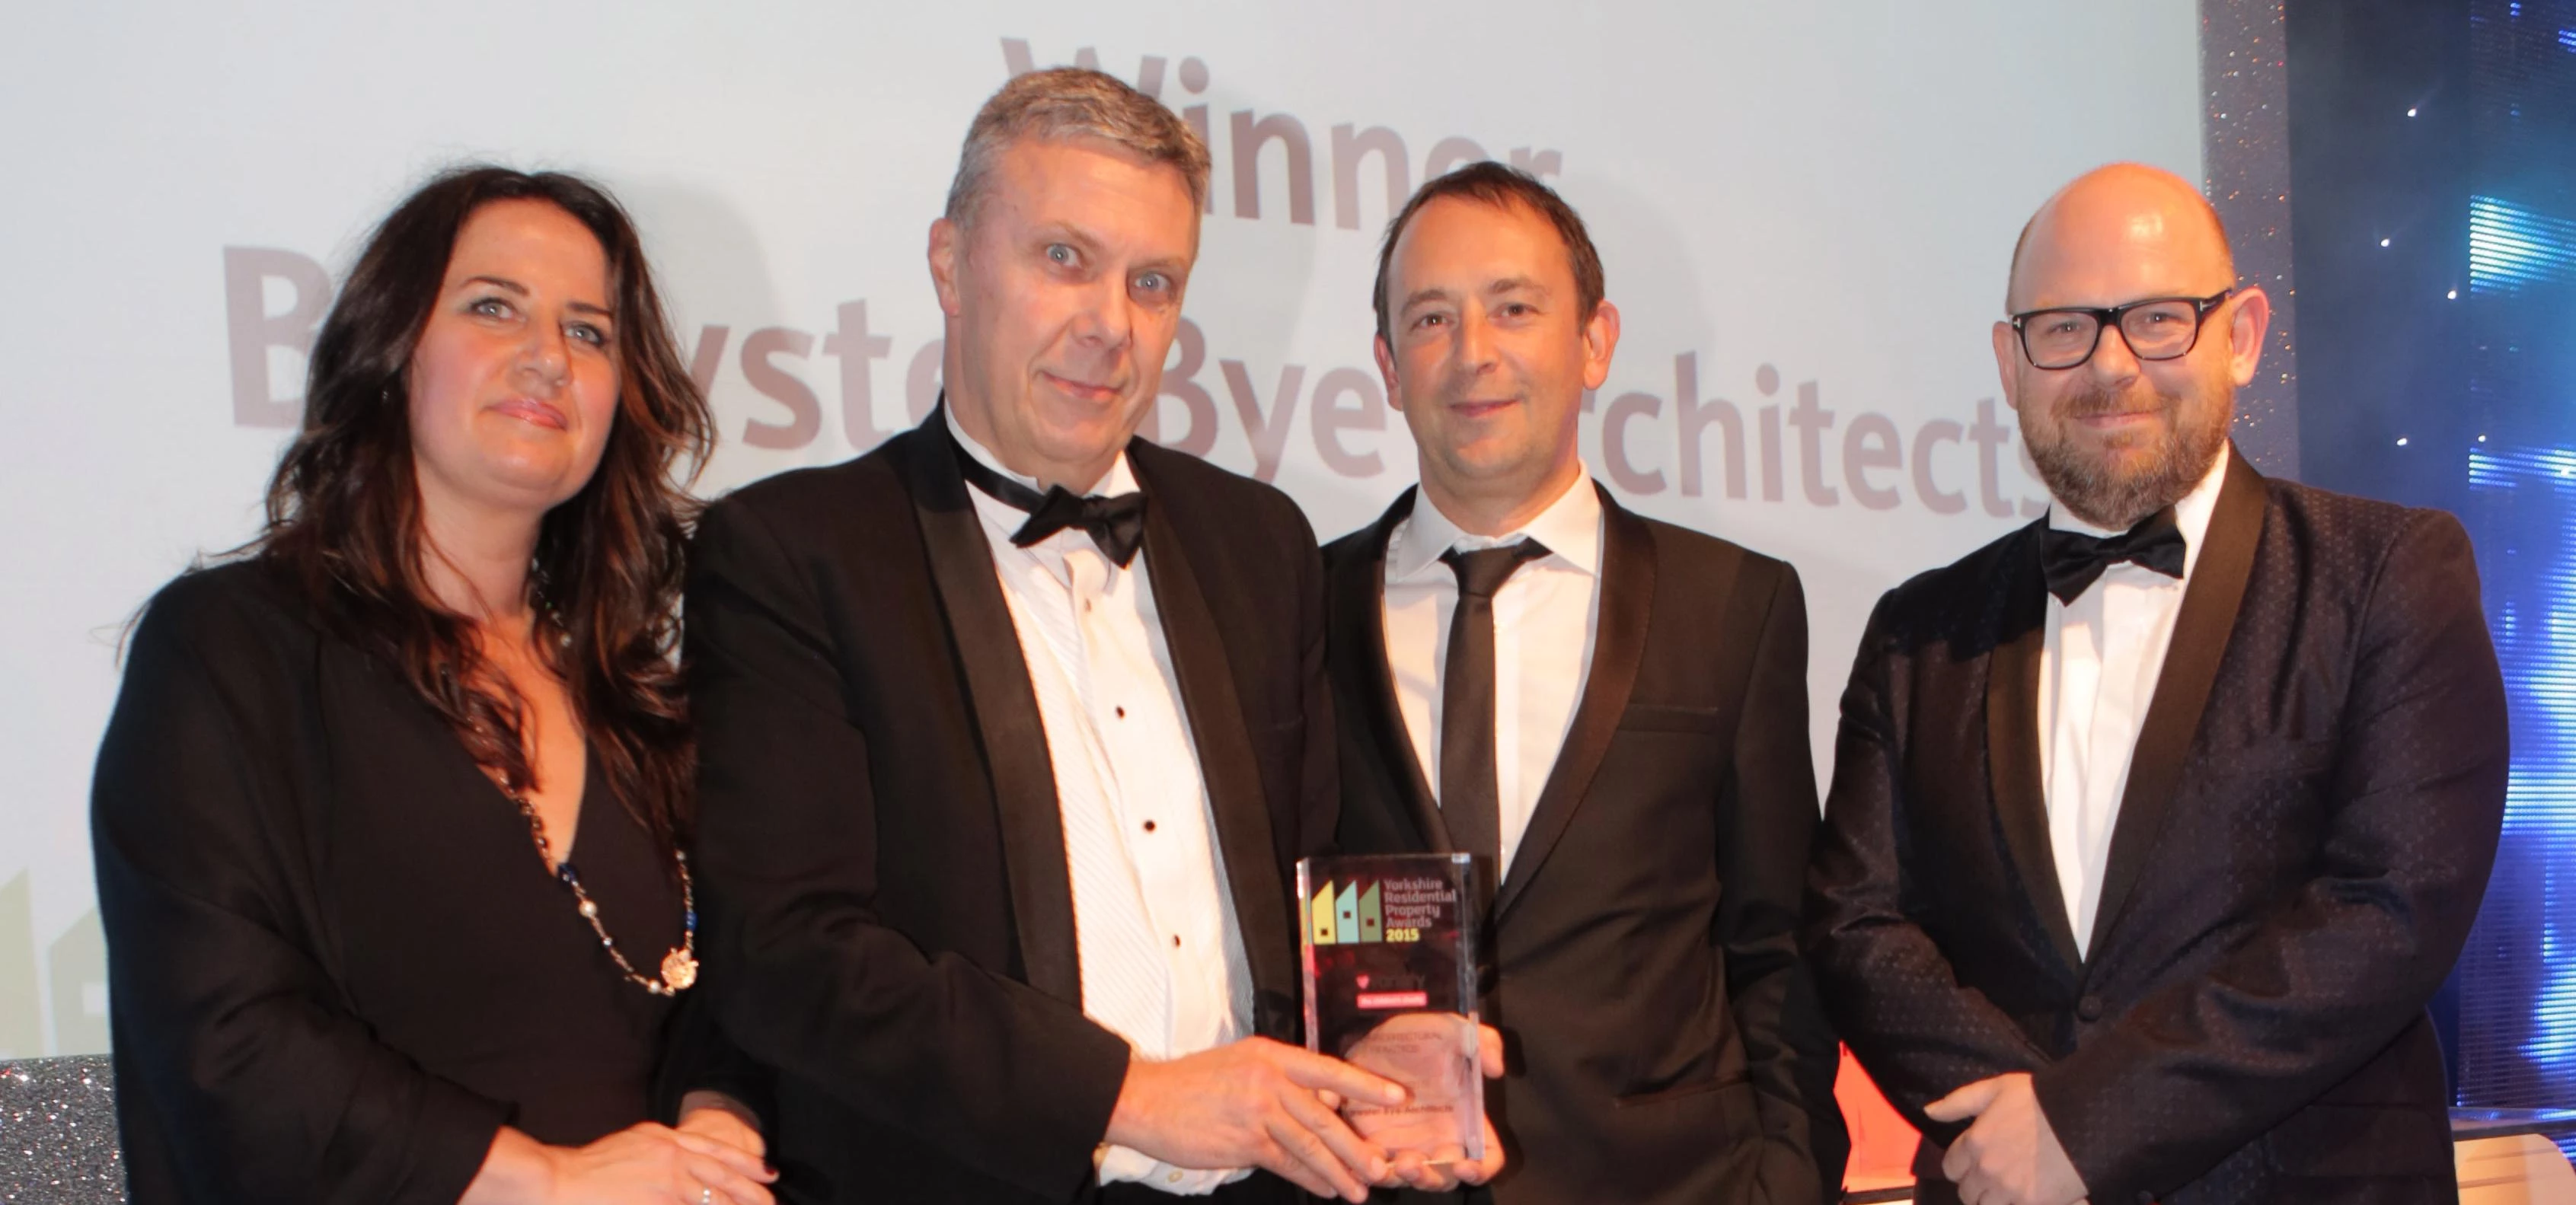 Brewster Bye Architects collect their award 